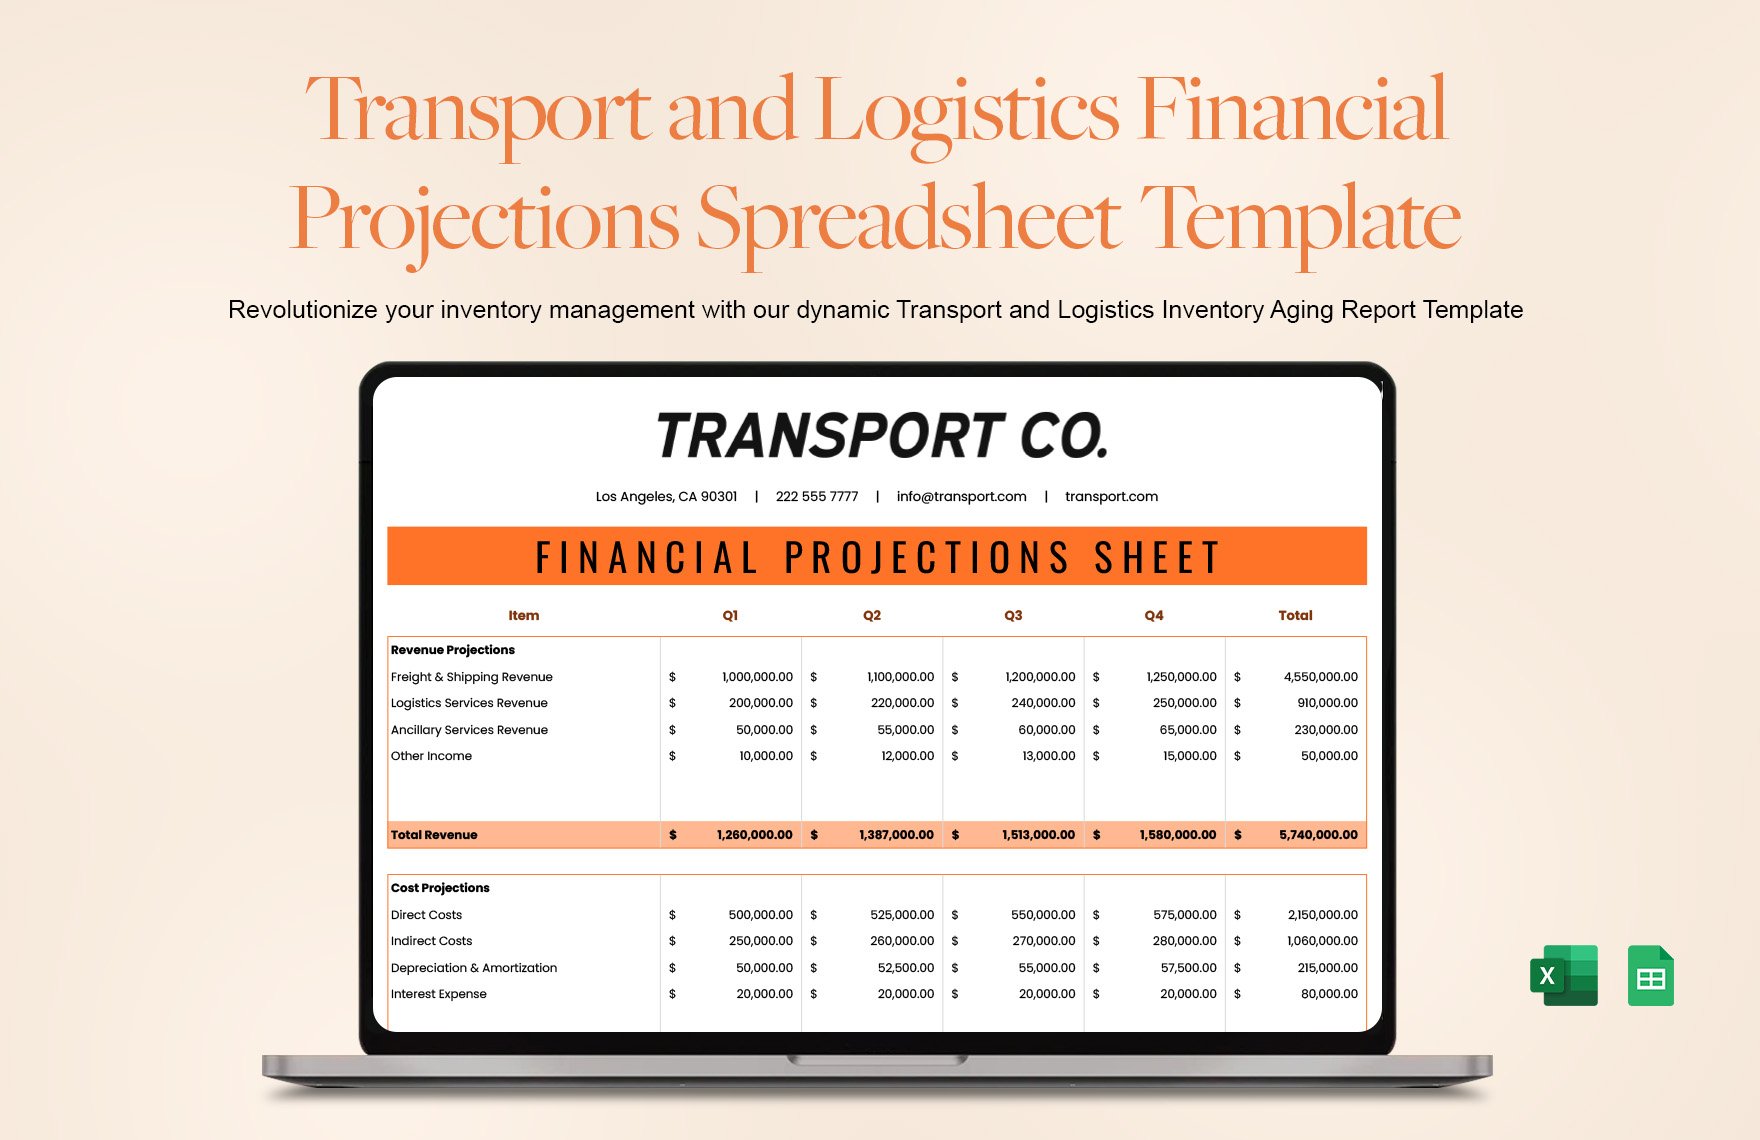 Transport and Logistics Financial Projections Spreadsheet Template